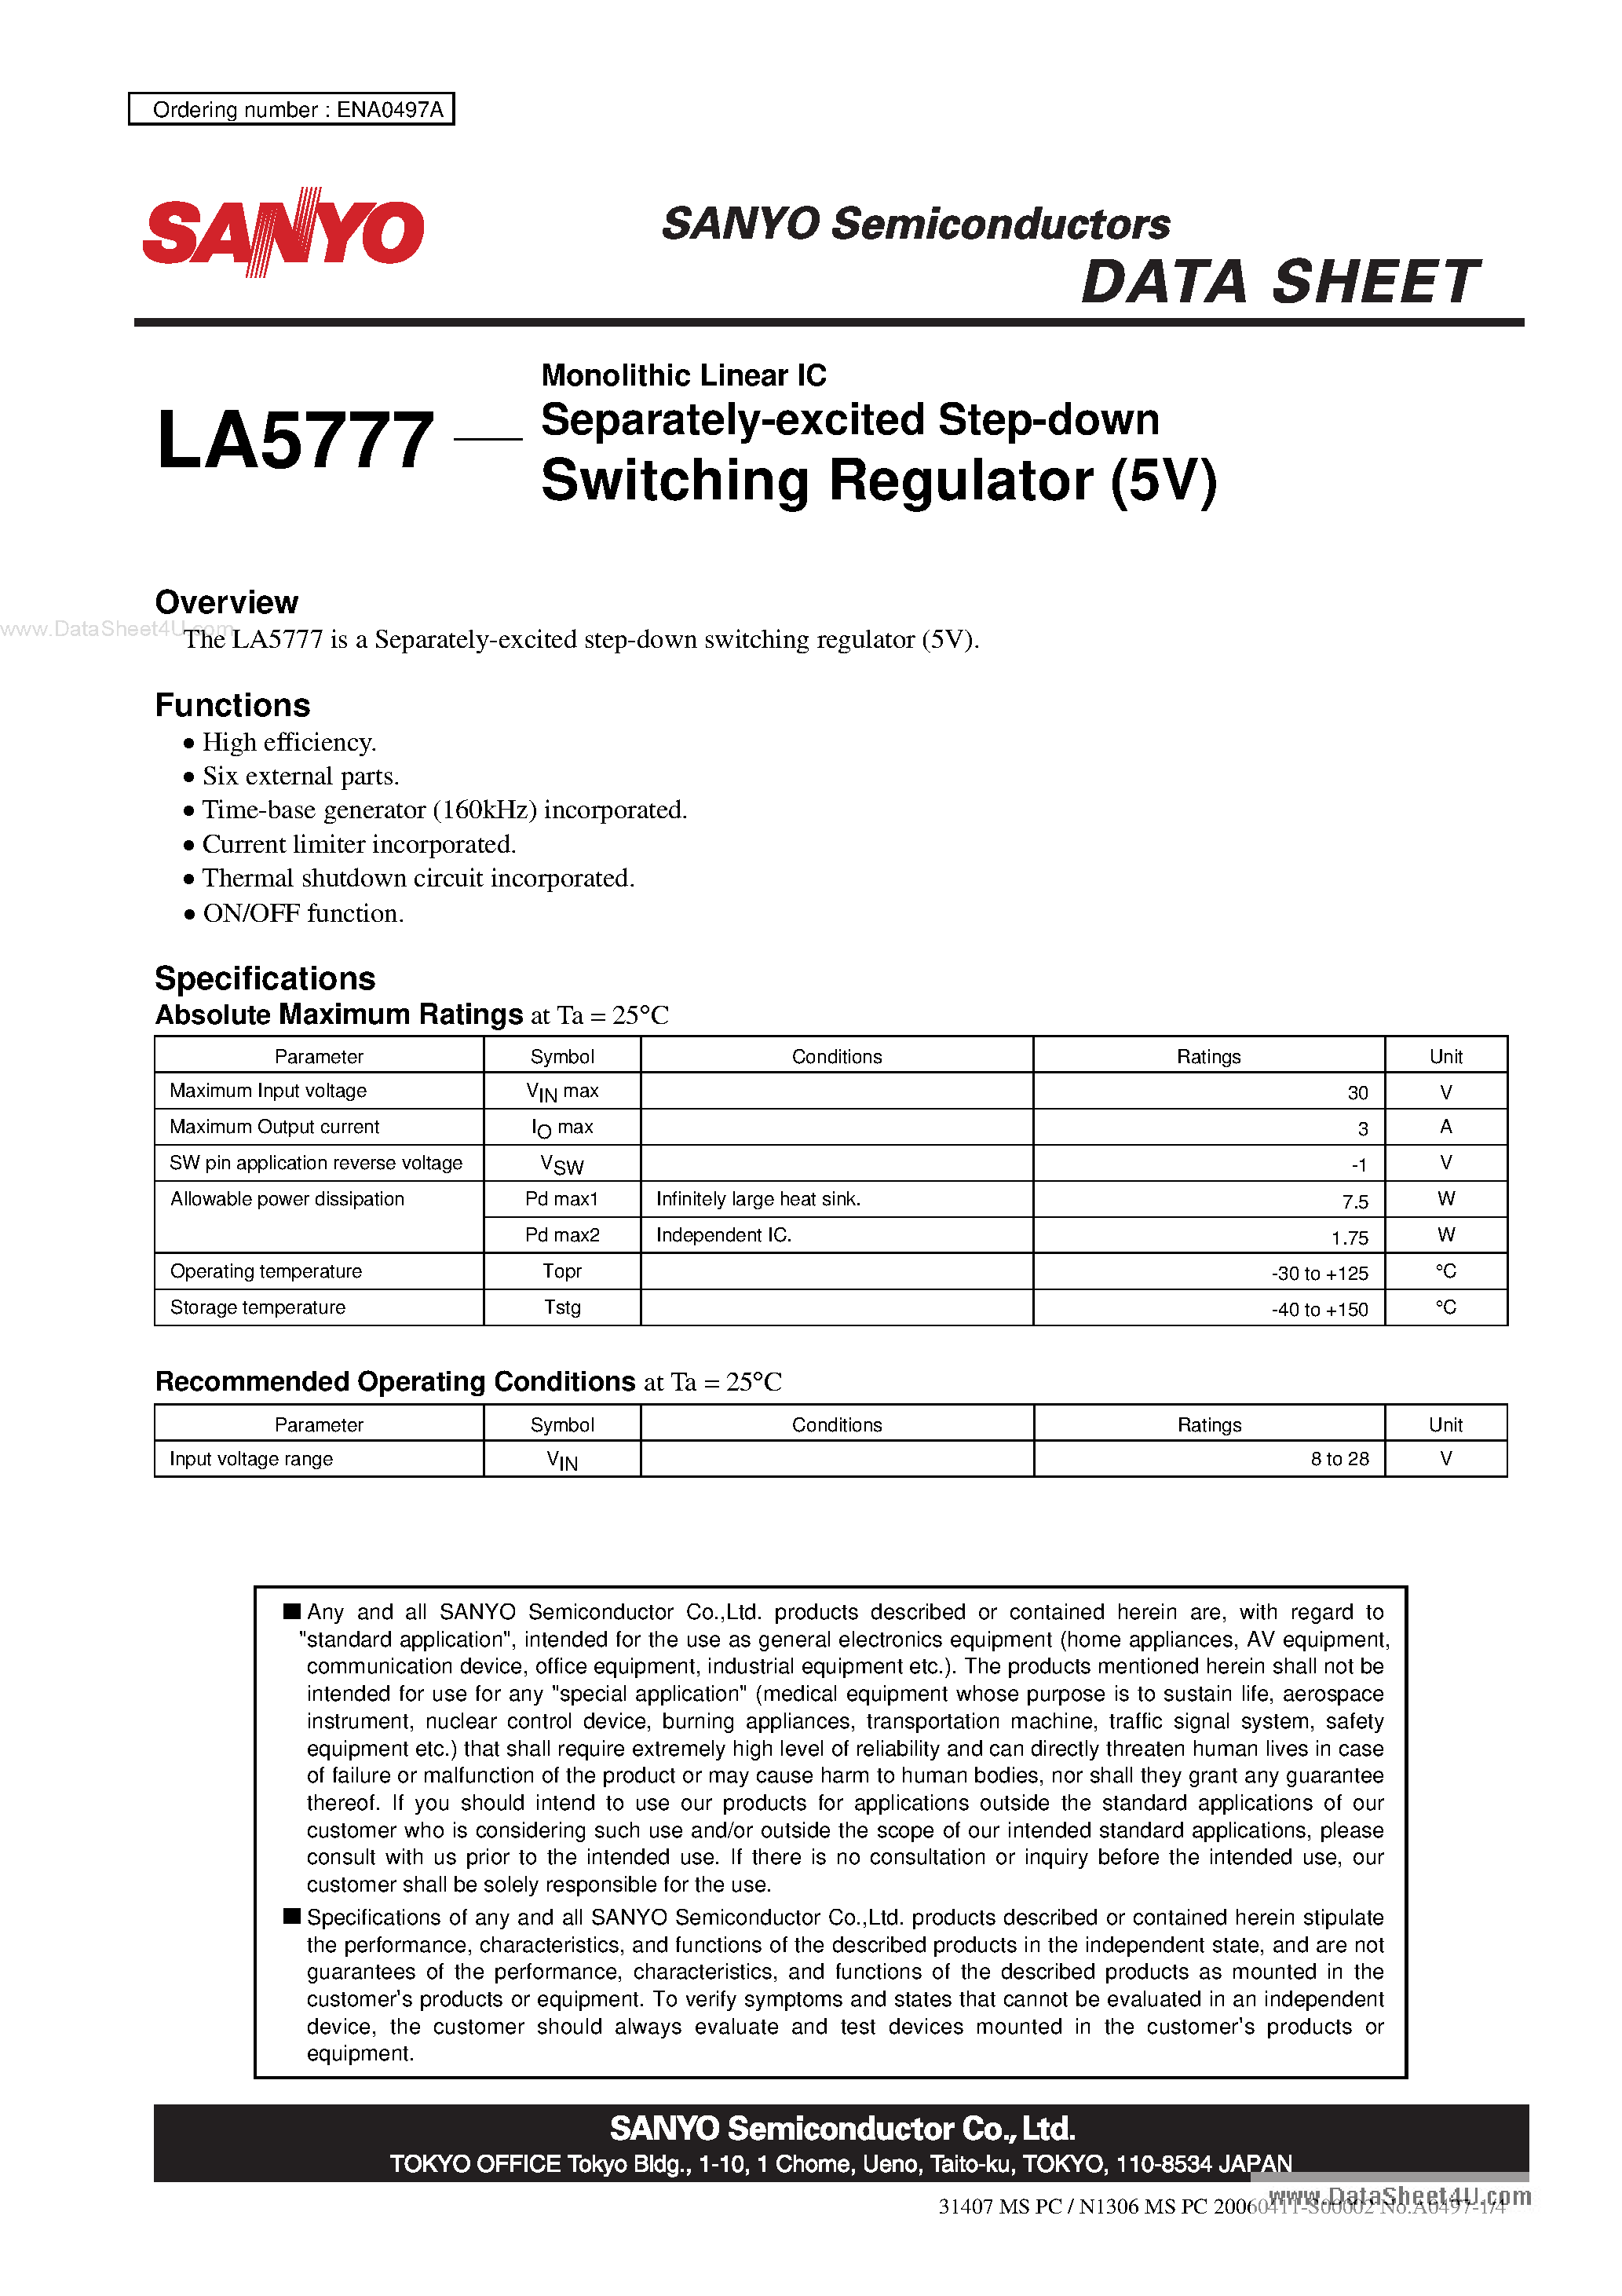 Даташит LA5777 - Monolithic Linear IC Separately-excited Step-down Switching Regulator страница 1